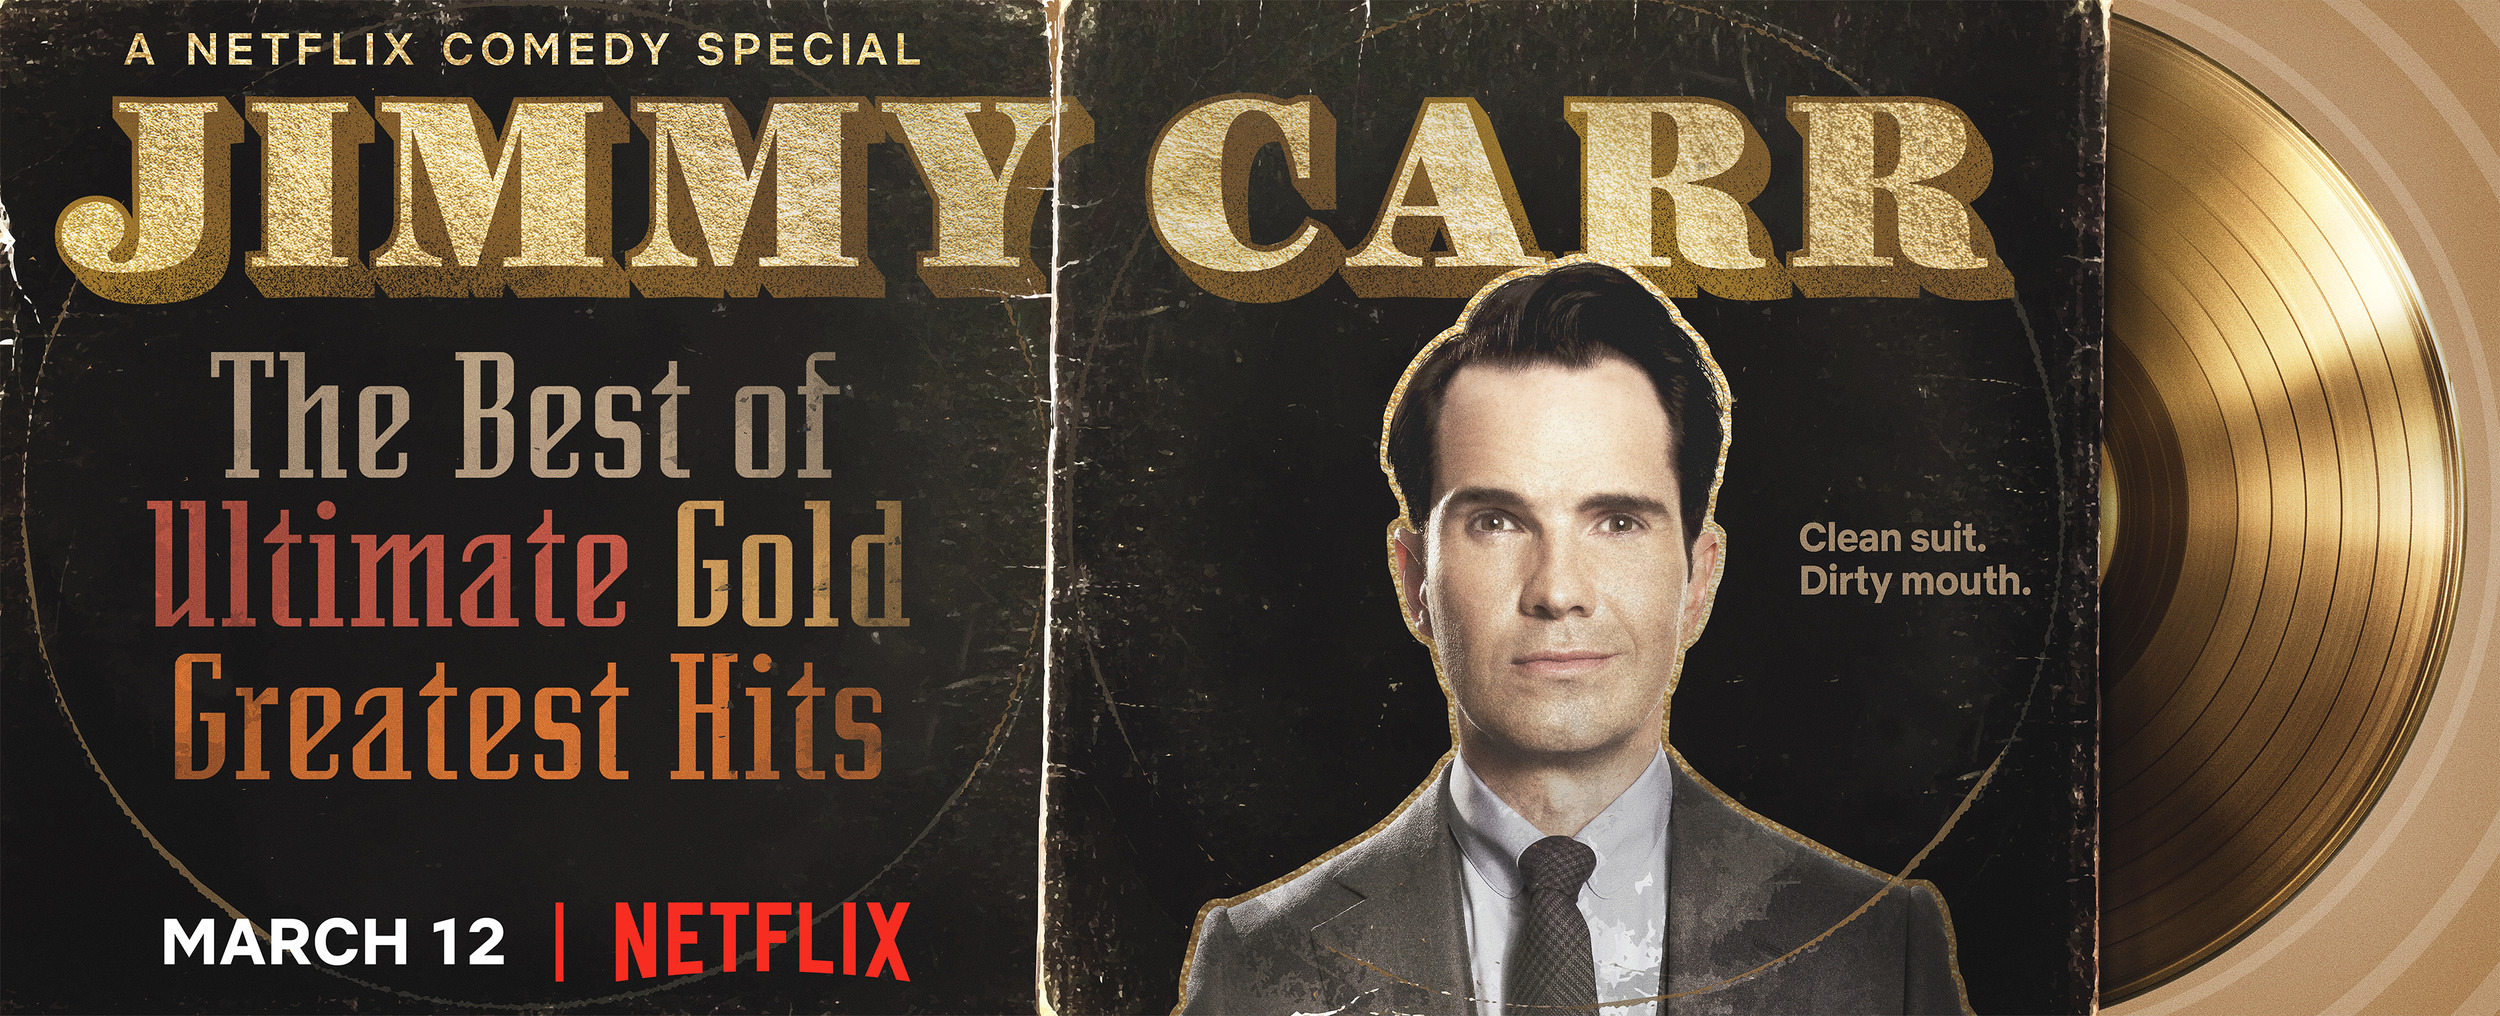 Mega Sized TV Poster Image for Jimmy Carr: The Best of Ultimate Gold Greatest Hits 